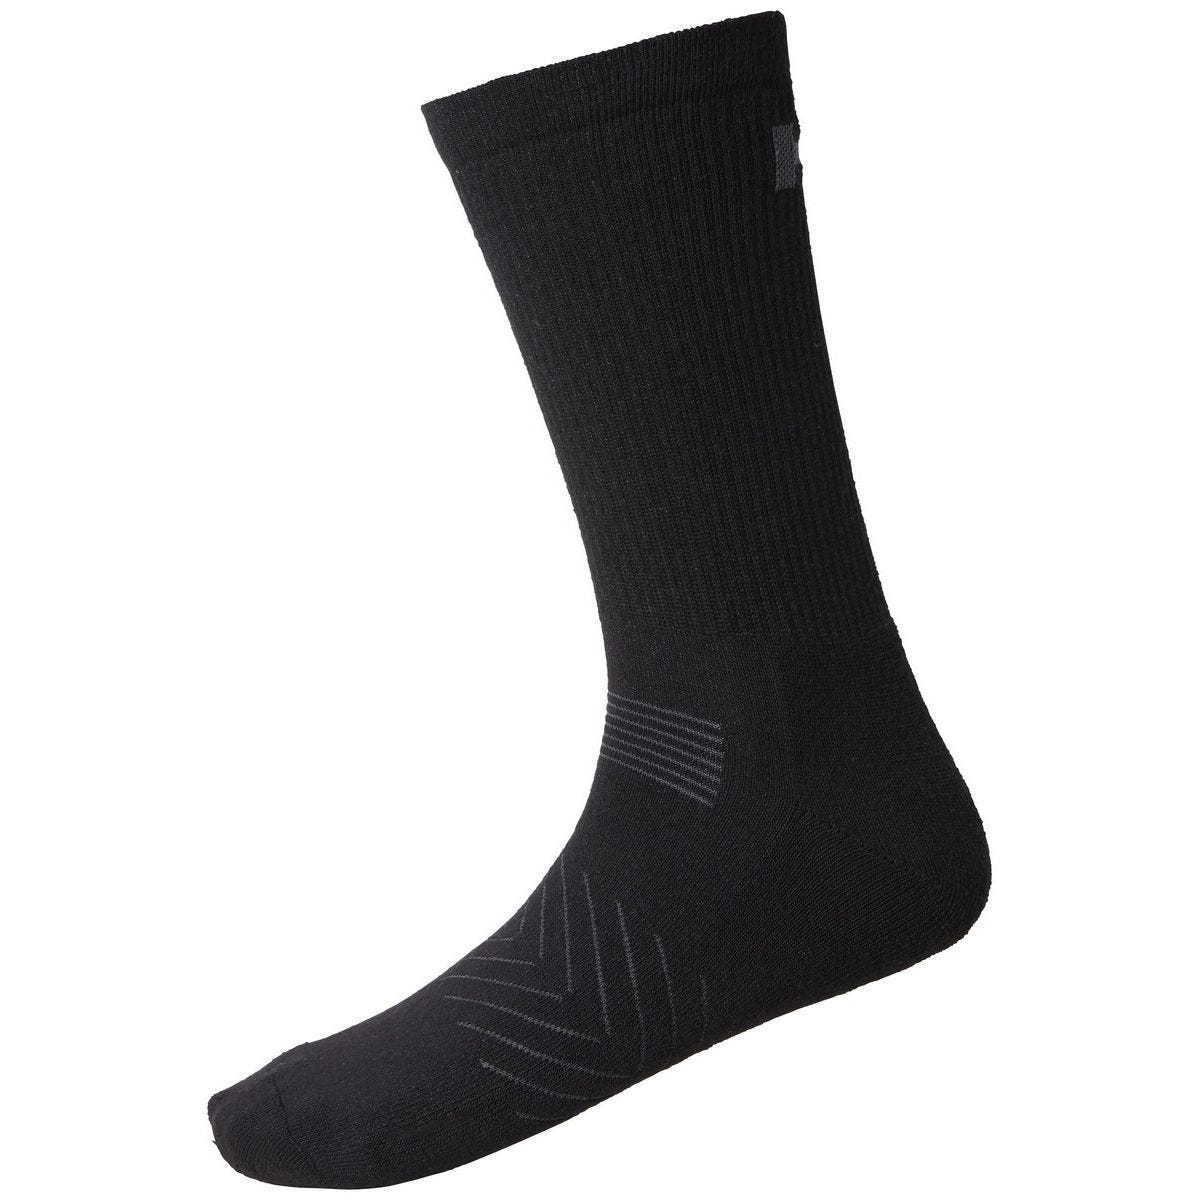 3 chaussettes Manchester - HELLY HANSEN - Taille 36/38 0